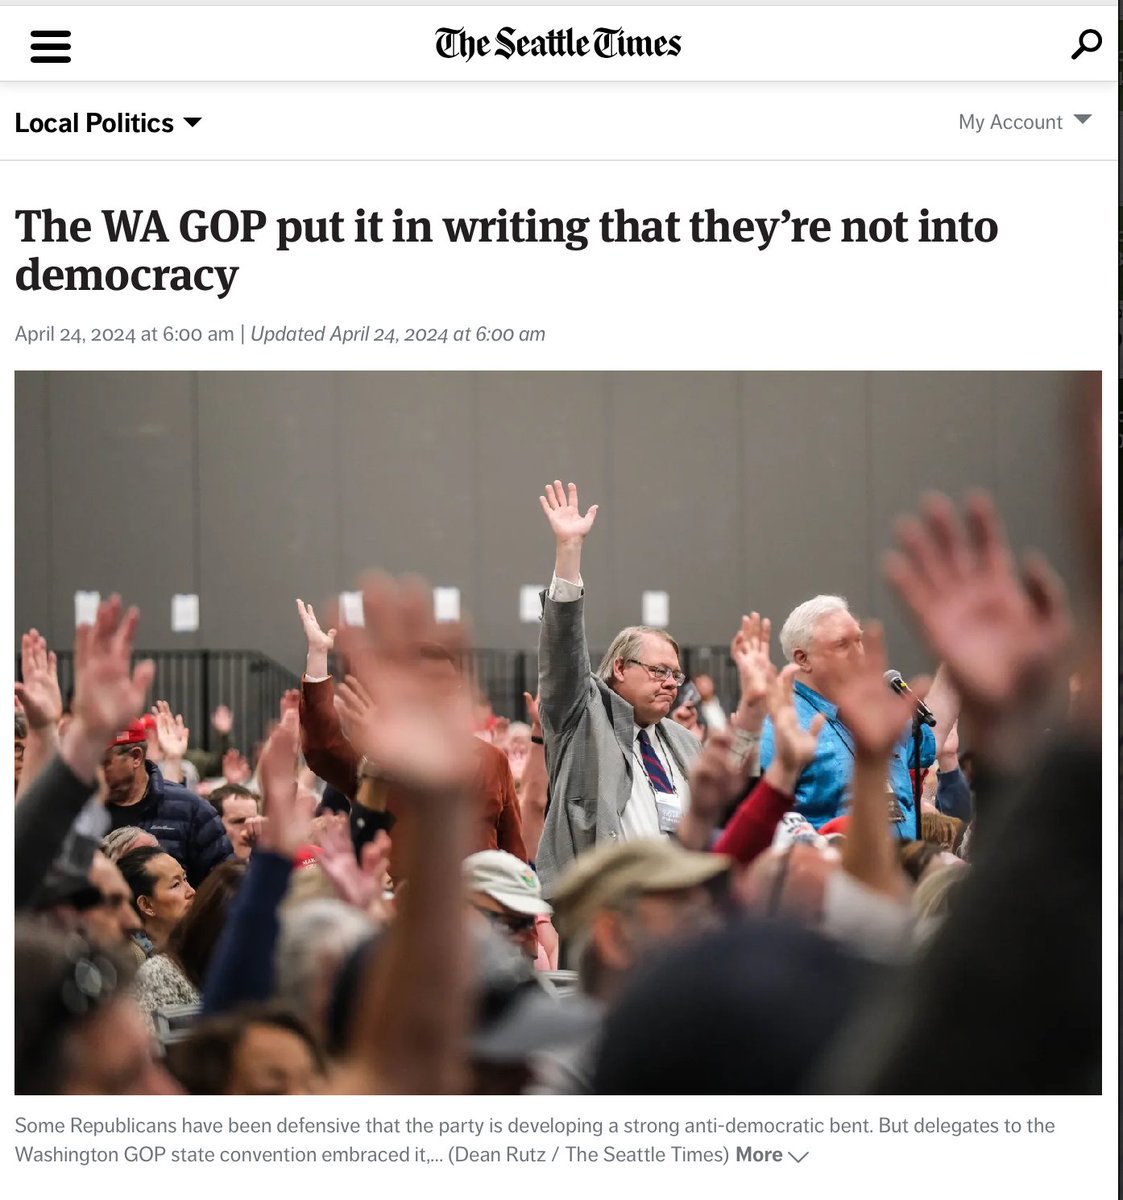 MEANWHILE in #WashingtonState .. The WA GOP put it in writing that they’re not into democracy 
tinyurl.com/ynfe8dtf  
Republican base, it turns out, is now opposed to democracy. Their words, not mine, as you’ll soon see. READ FULL PIECE ... it sickens you.
@votevets @maddow